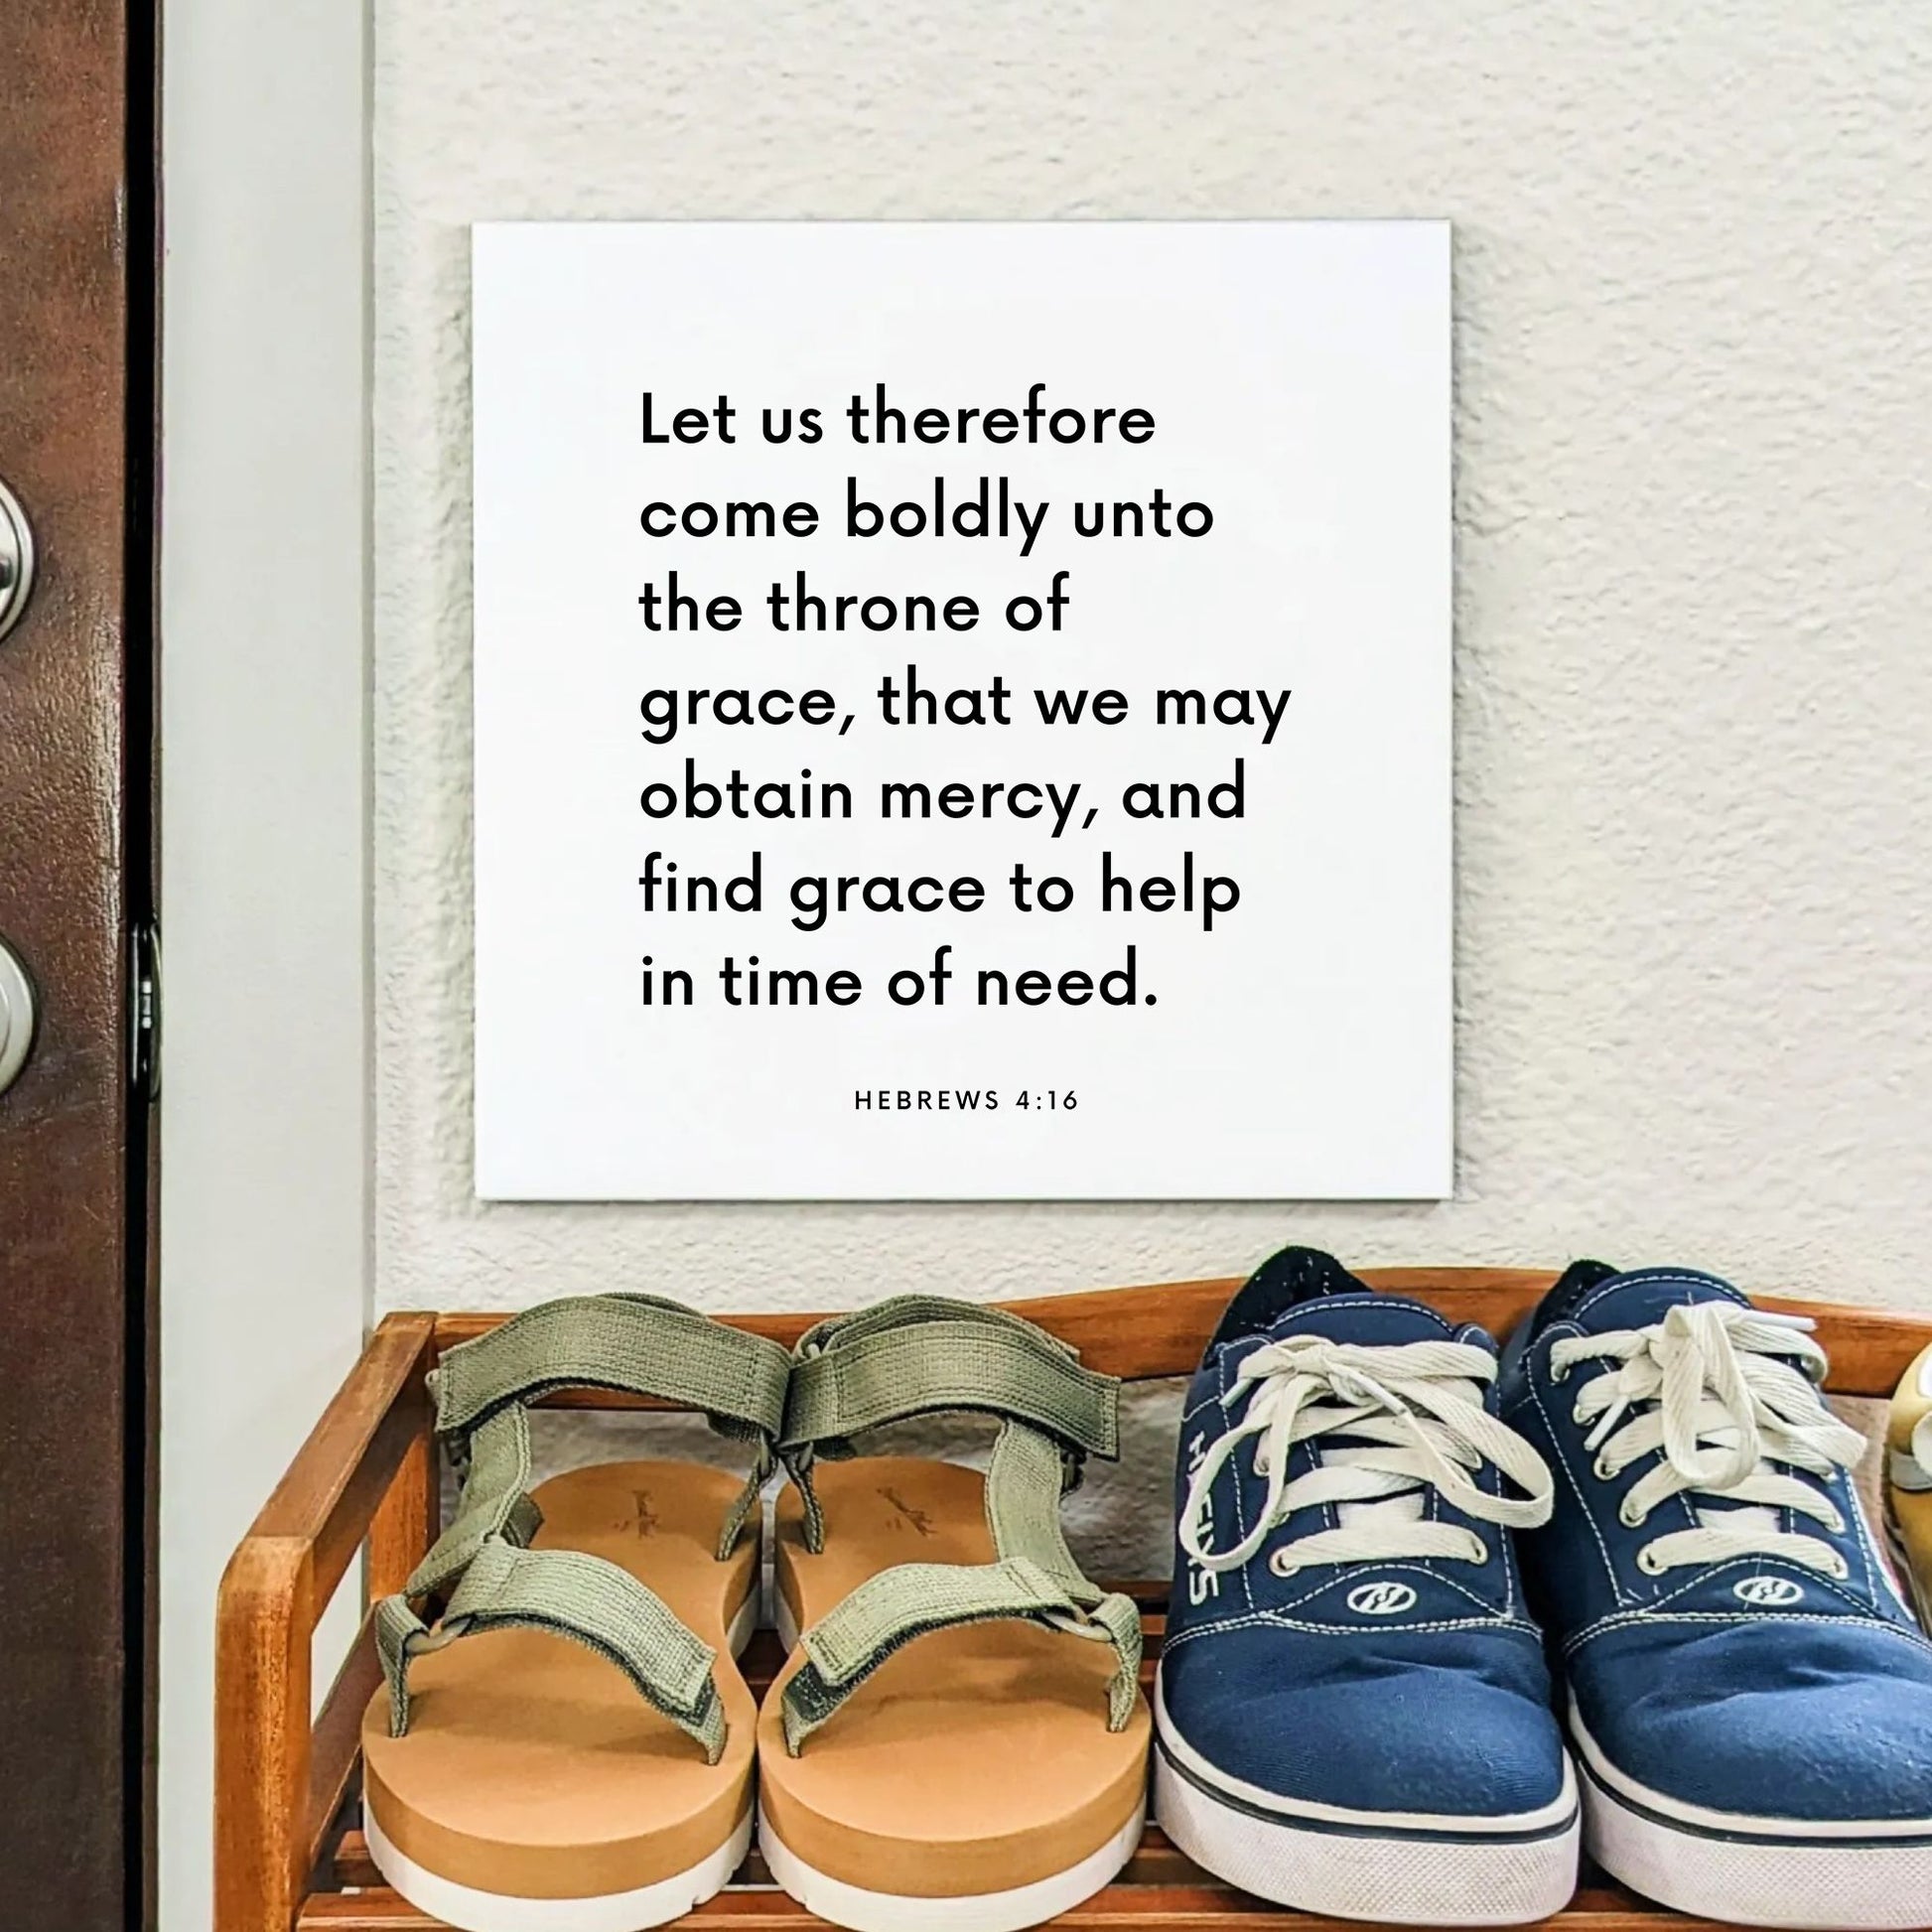 Shoes mouting of the scripture tile for Hebrews 4:16 - "Let us therefore come boldly unto the throne of grace"